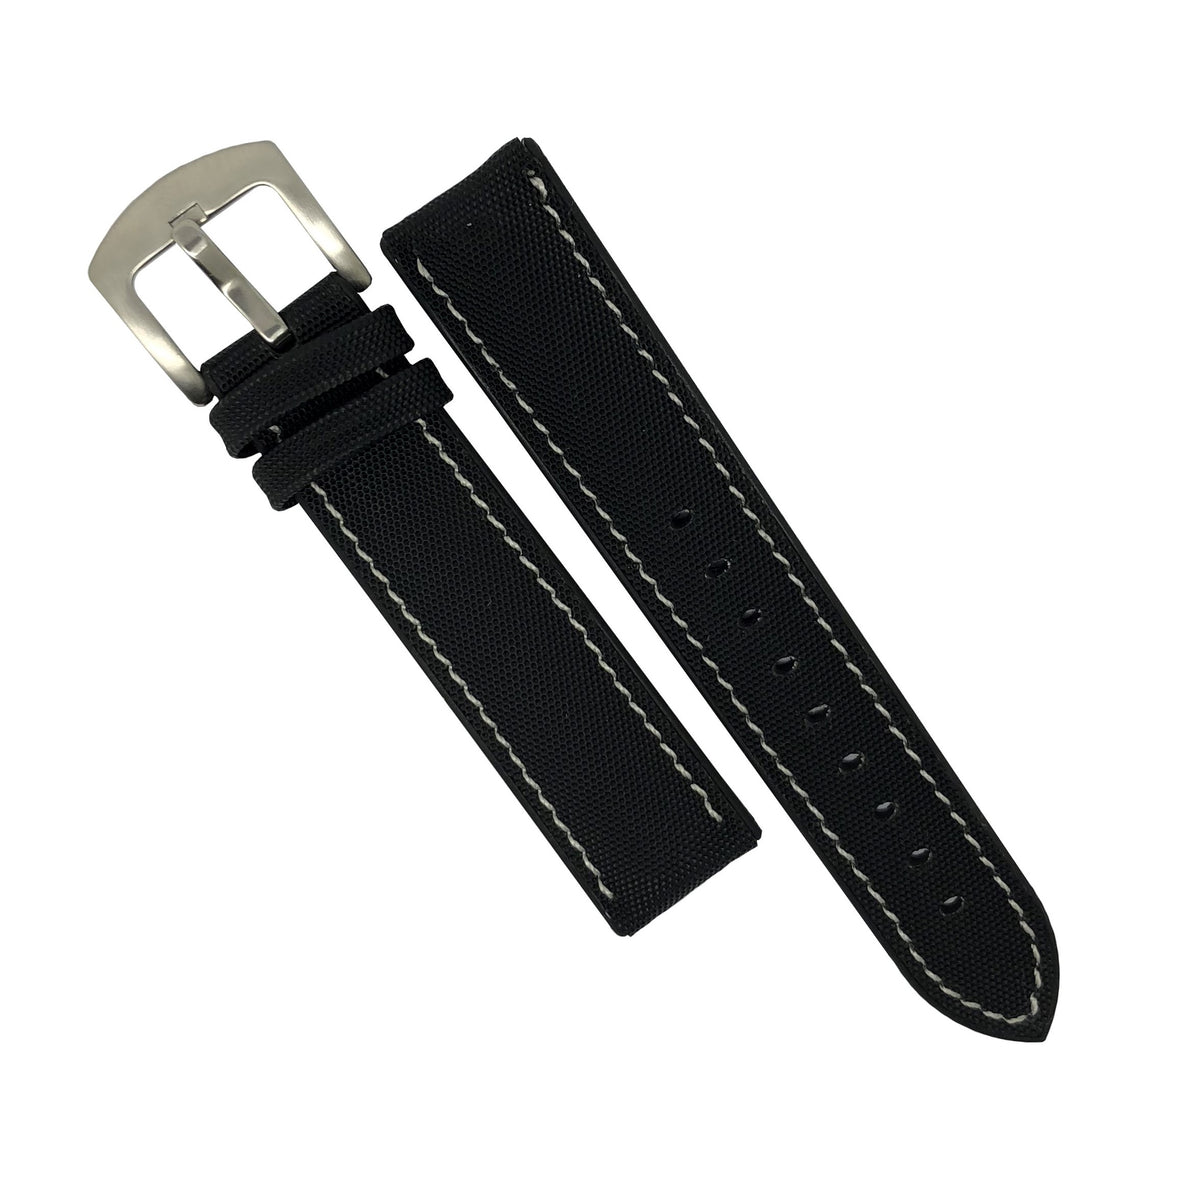 Performax N1 Hybrid Strap in Black with White stitching (20mm) - Nomad watch Works